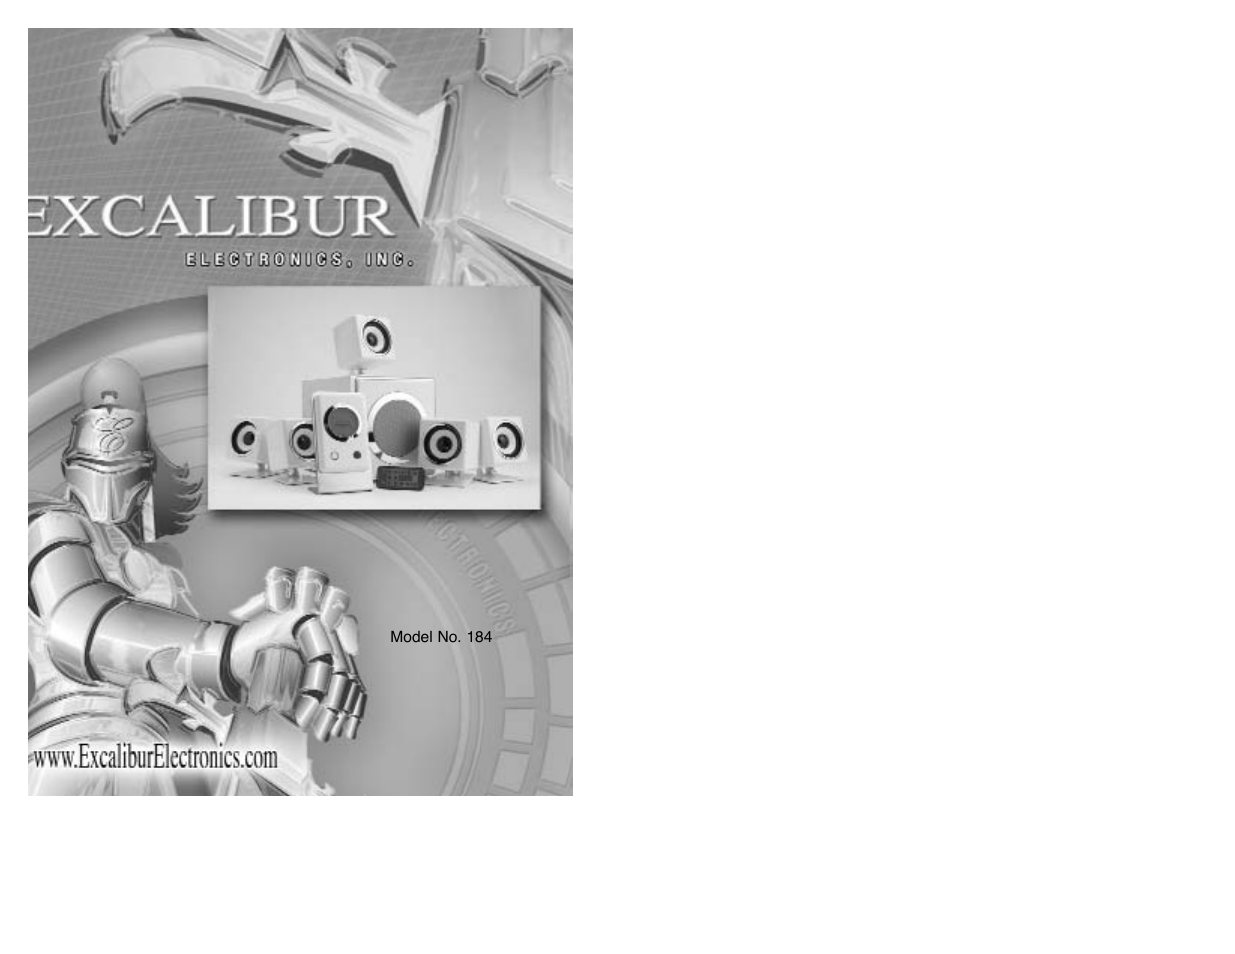 EXCALIBUR 184 iBlaster Music System User Manual | 11 pages